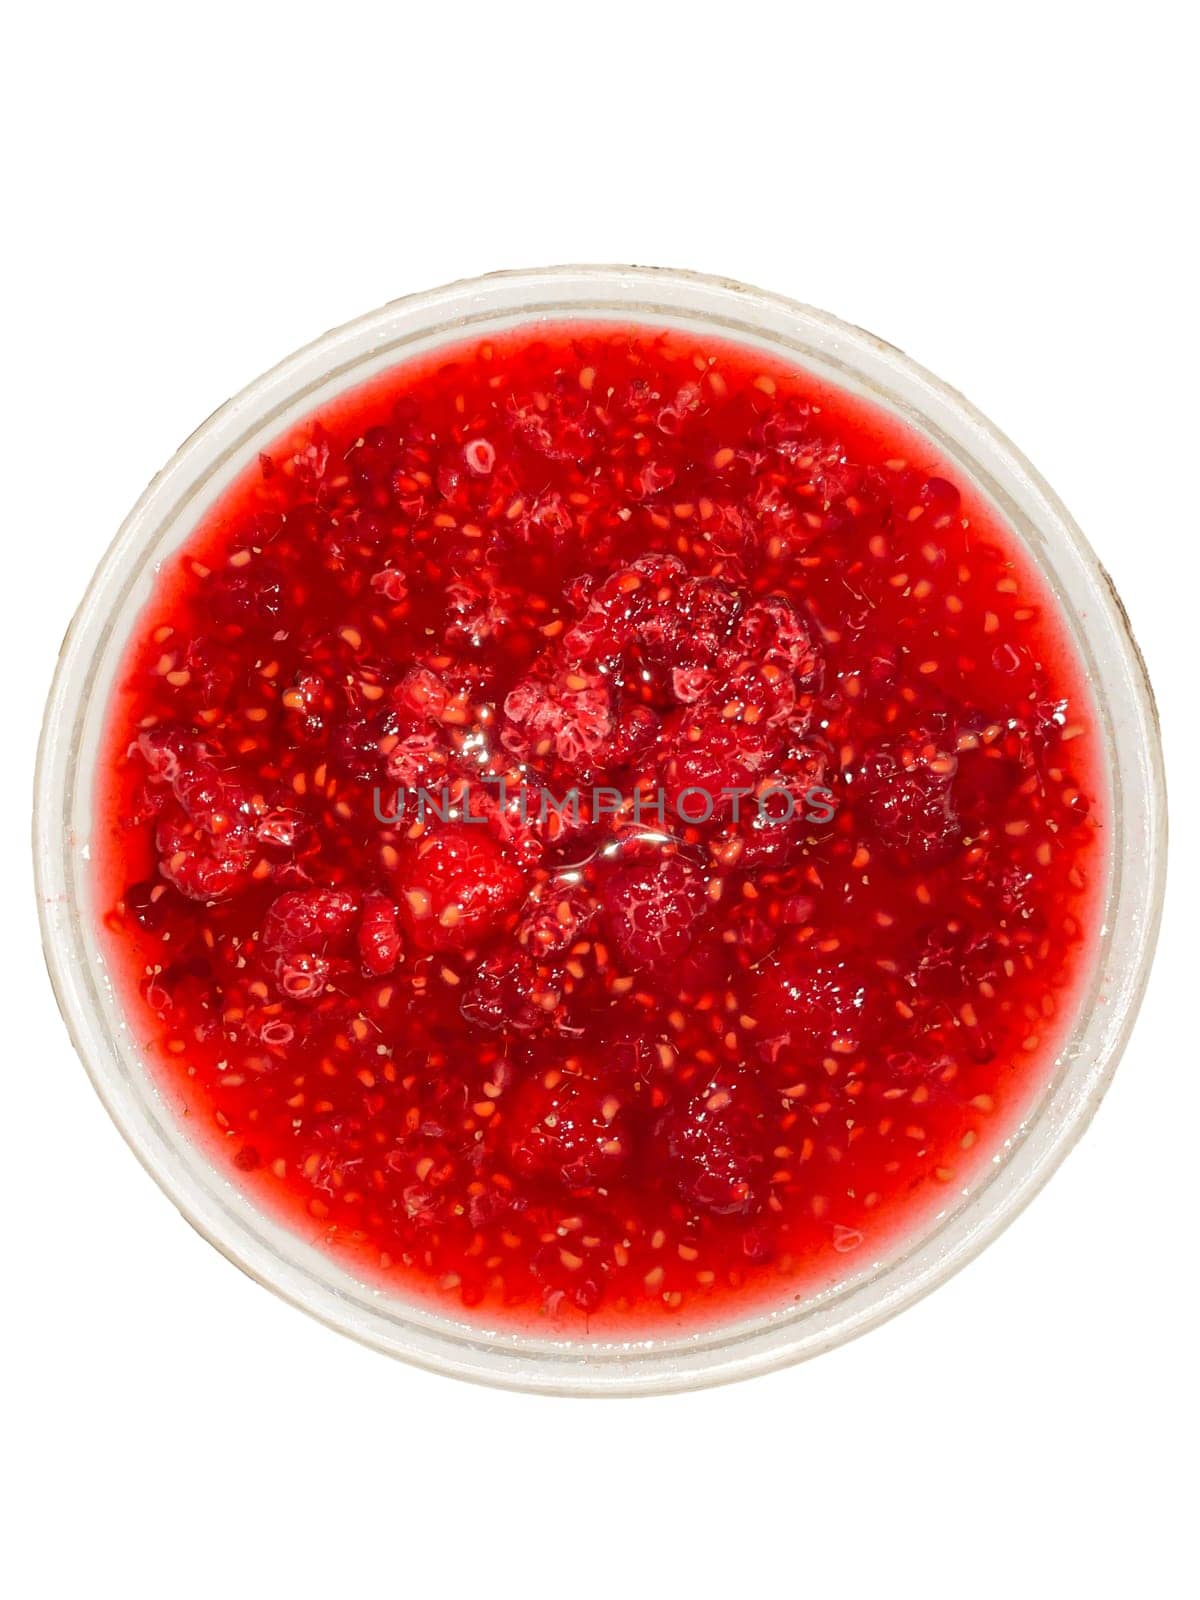 raspberry jam in a cup on a white background by KCreeper